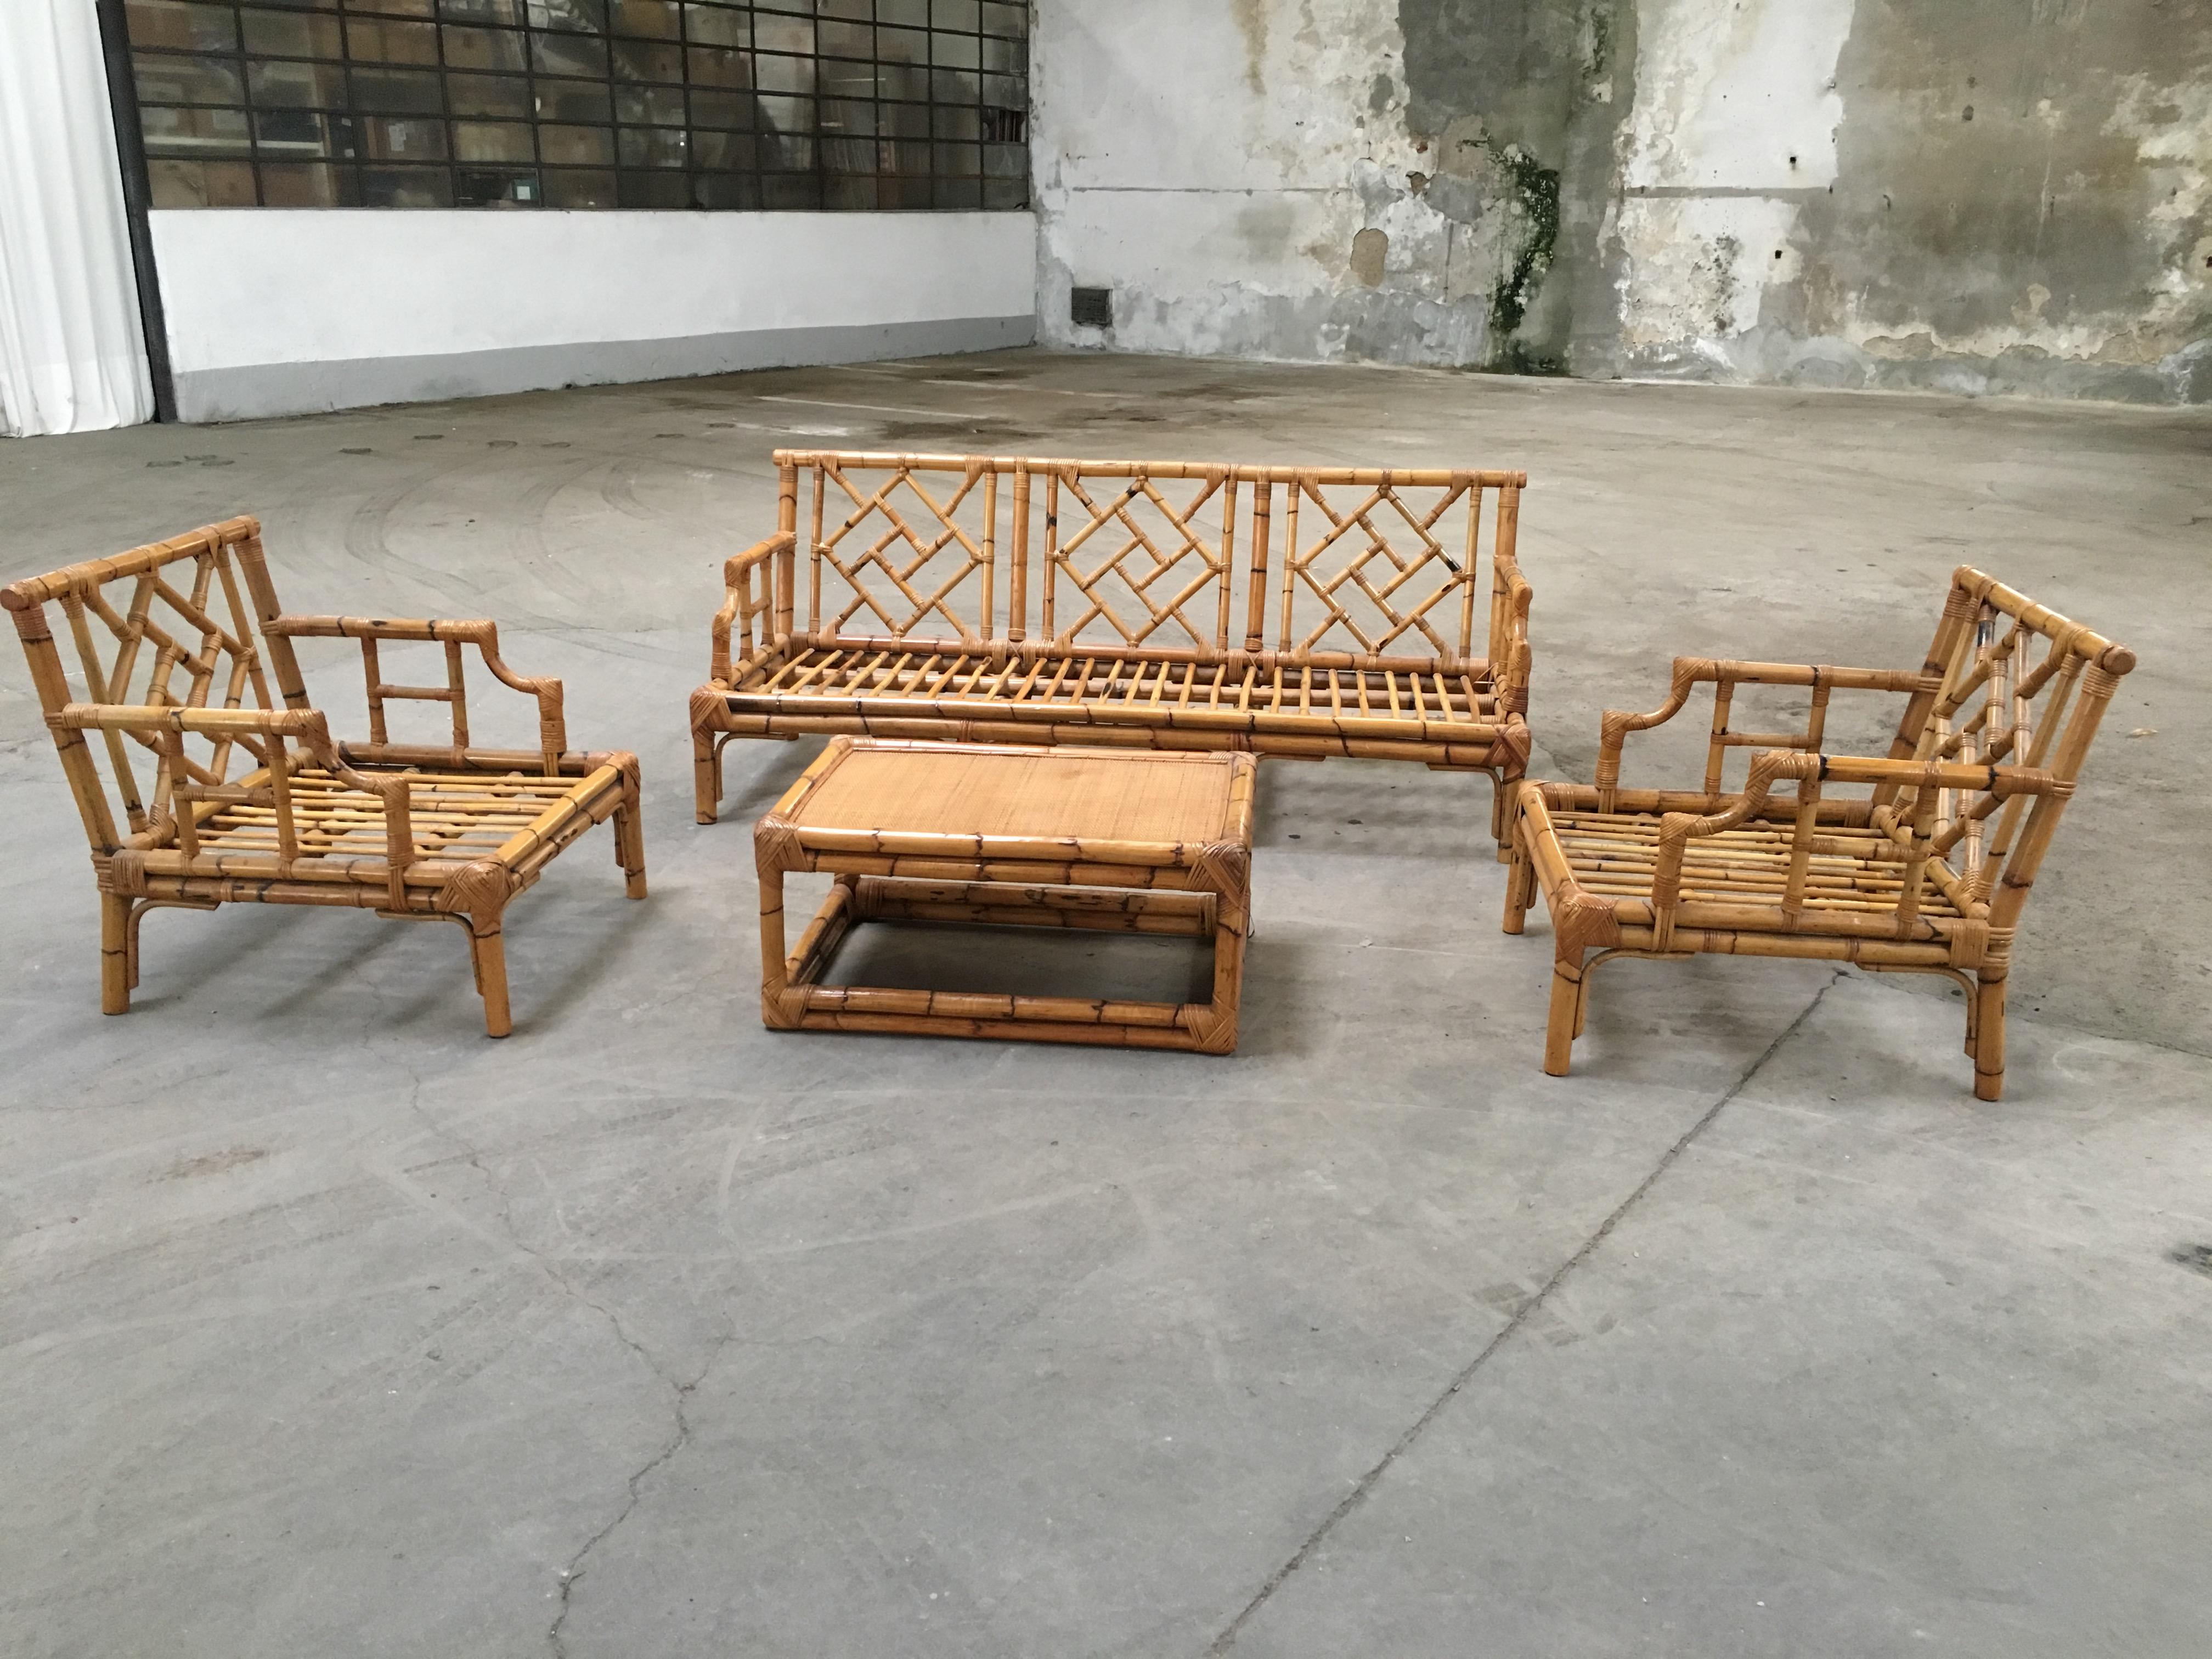 Mid-Century Modern Italian bamboo living room set by Vivai del Sud.
The set consist on 1 sofa, 2 armchairs and 1 coffee table
Measurements: 
Sofa width cm. 195, depth cm. 76, height cm. 77 (Seat height cm. 32) 
Armchairs width cm. 75, depth cm.